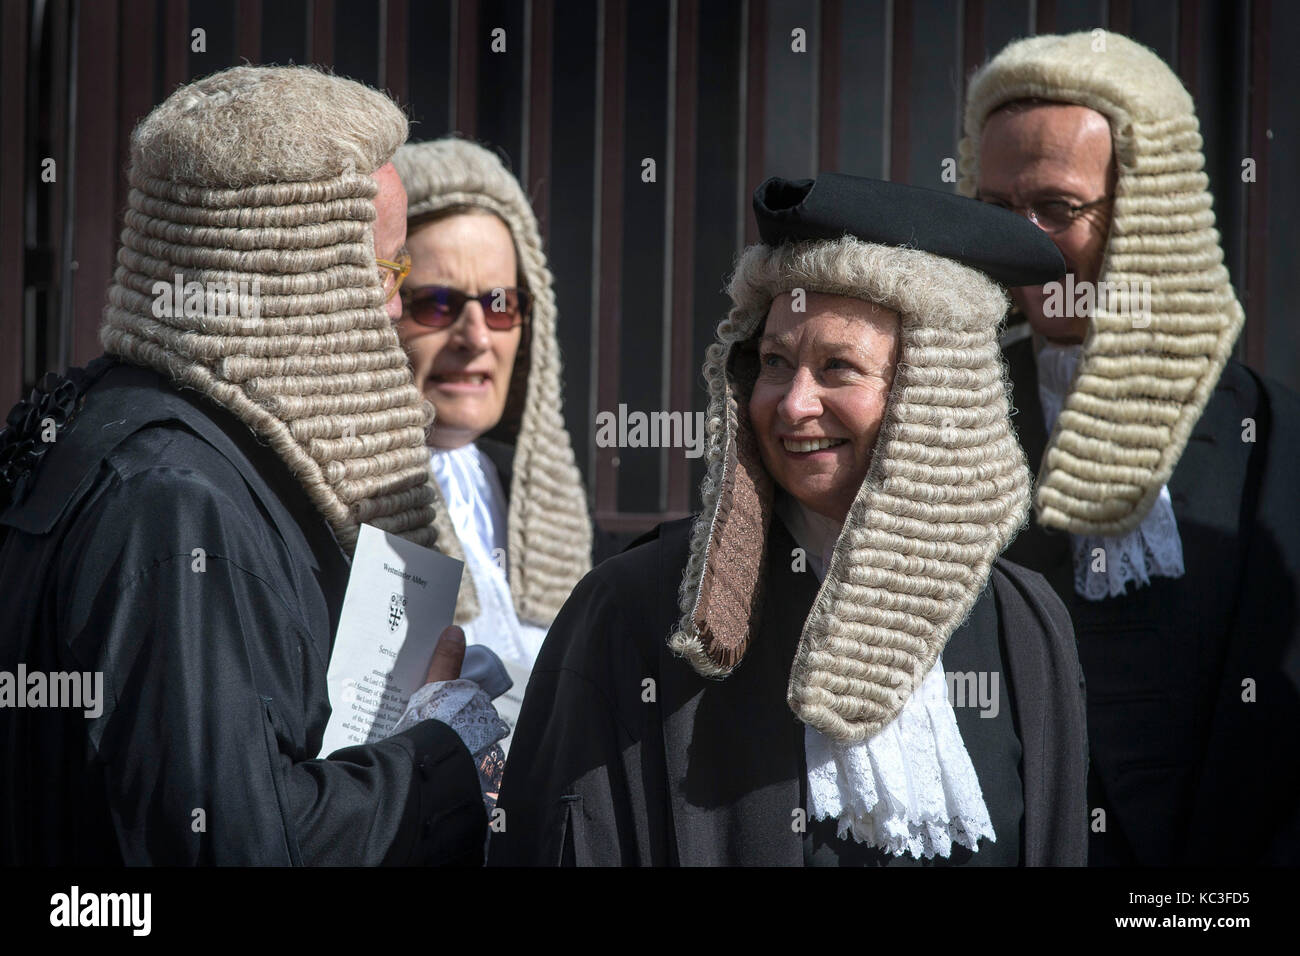 Members of the judiciary walk from Westminster Abbey to the Palace of Westminster in London following the annual Judges Service. Stock Photo